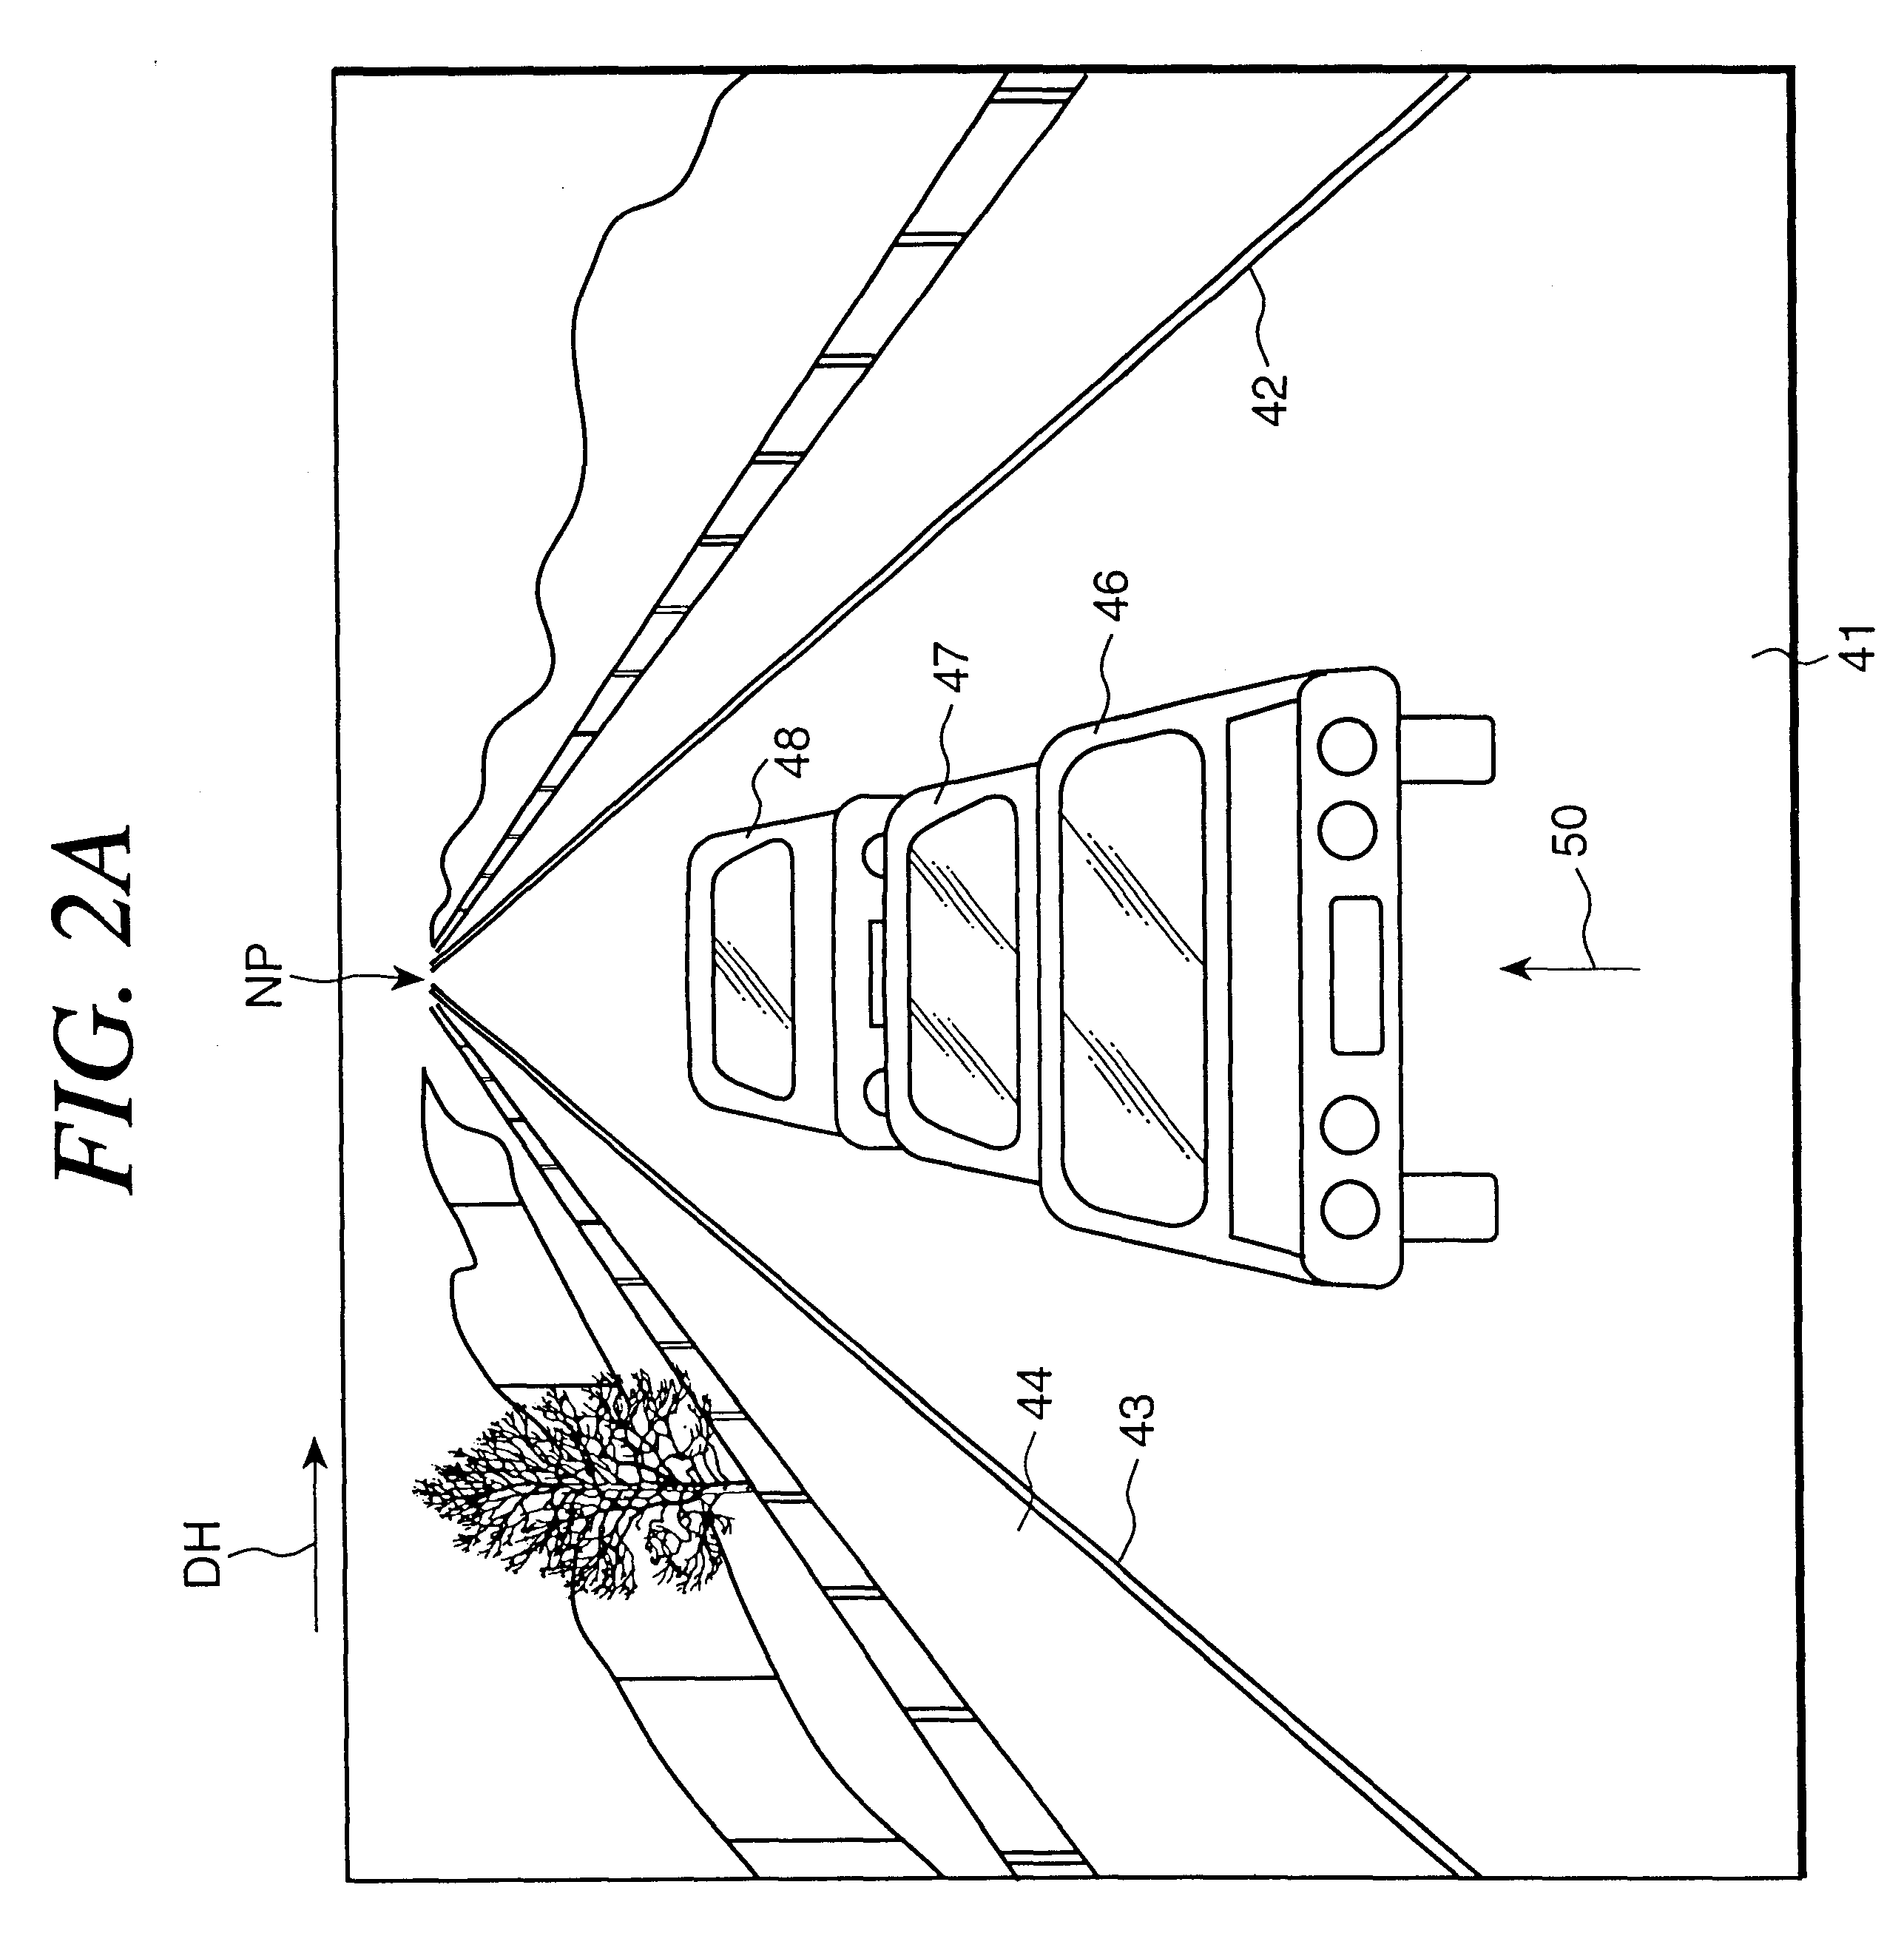 Object recognition apparatus and method